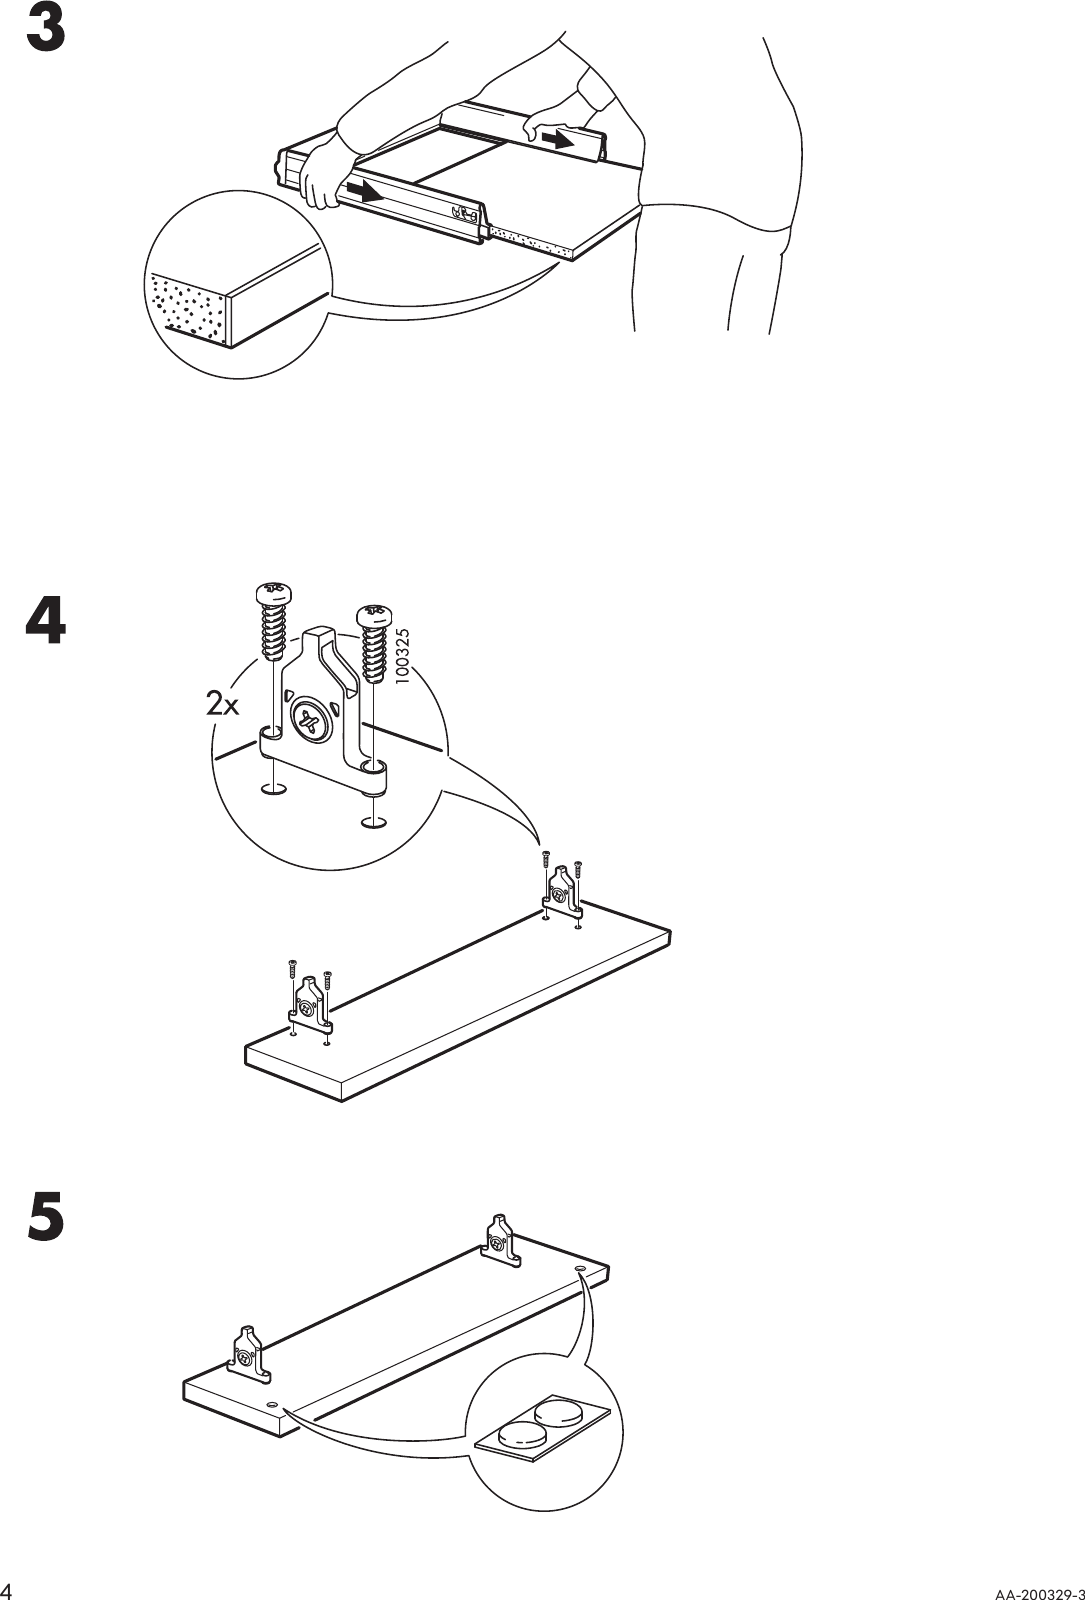 Page 4 of 8 - Ikea Ikea-Rationell-Full-Extending-Drawer-24-Assembly-Instruction